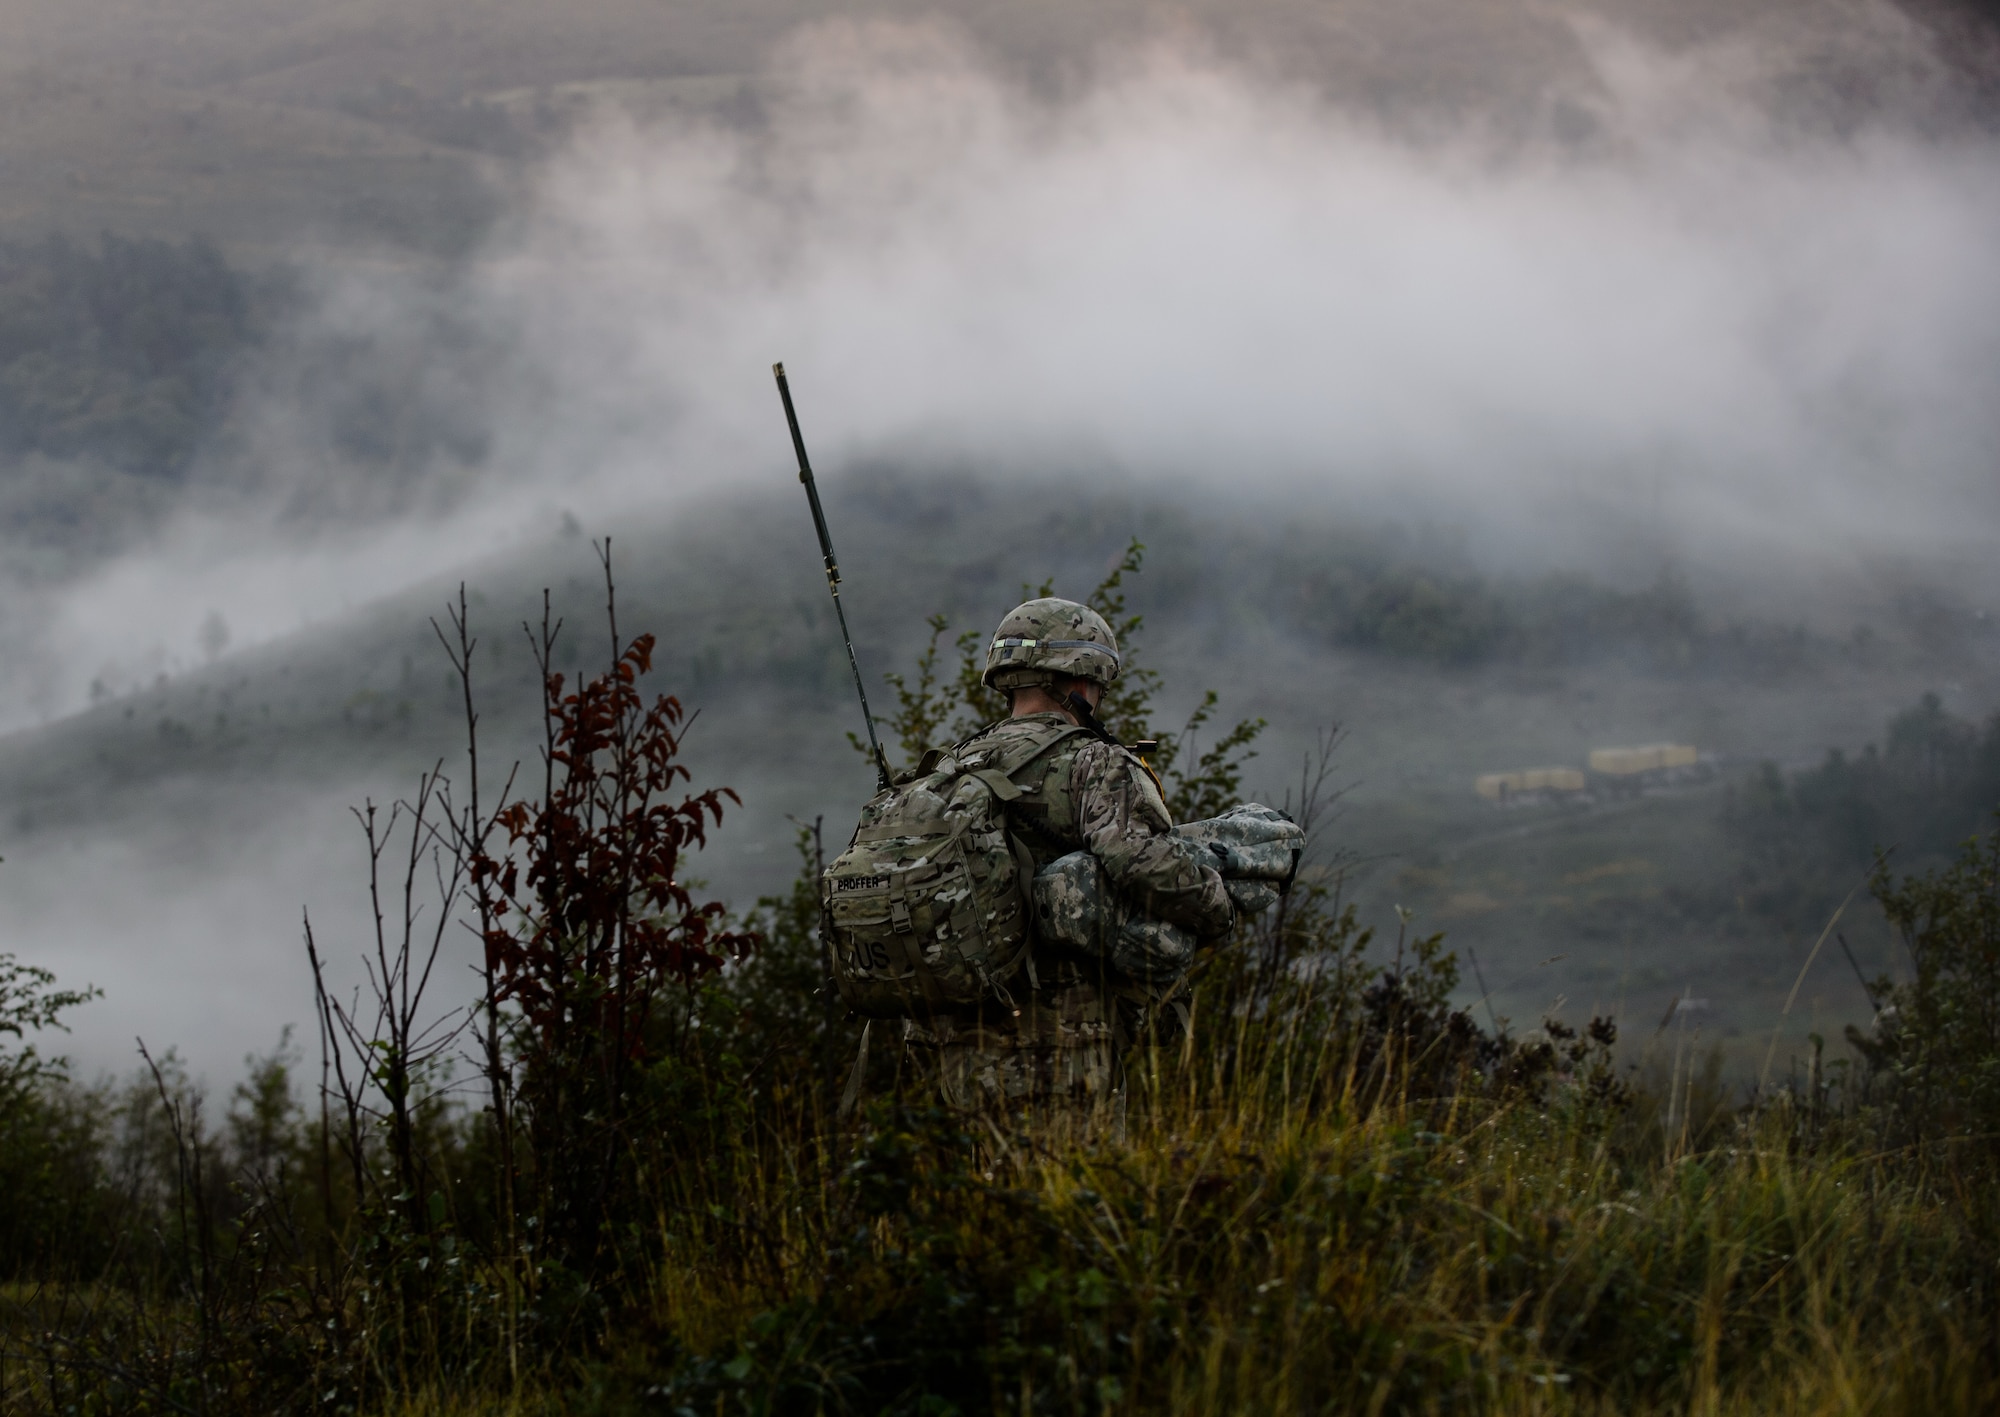 A U.S. Army Soldier from the 2nd Battalion, 503rd Infantry Regiment moves into position in preparation for a live-fire exercise Oct. 16, 2015, at Pocek Training Range near Postojna, Slovenia. The 2-503rd joined Slovenian army units and aircraft during exercise Rock Proof, which provided a realistic environment to train, enhance and develop skills. (U.S. Air Force photo/ Staff Sgt. Armando A. Schwier-Morales)